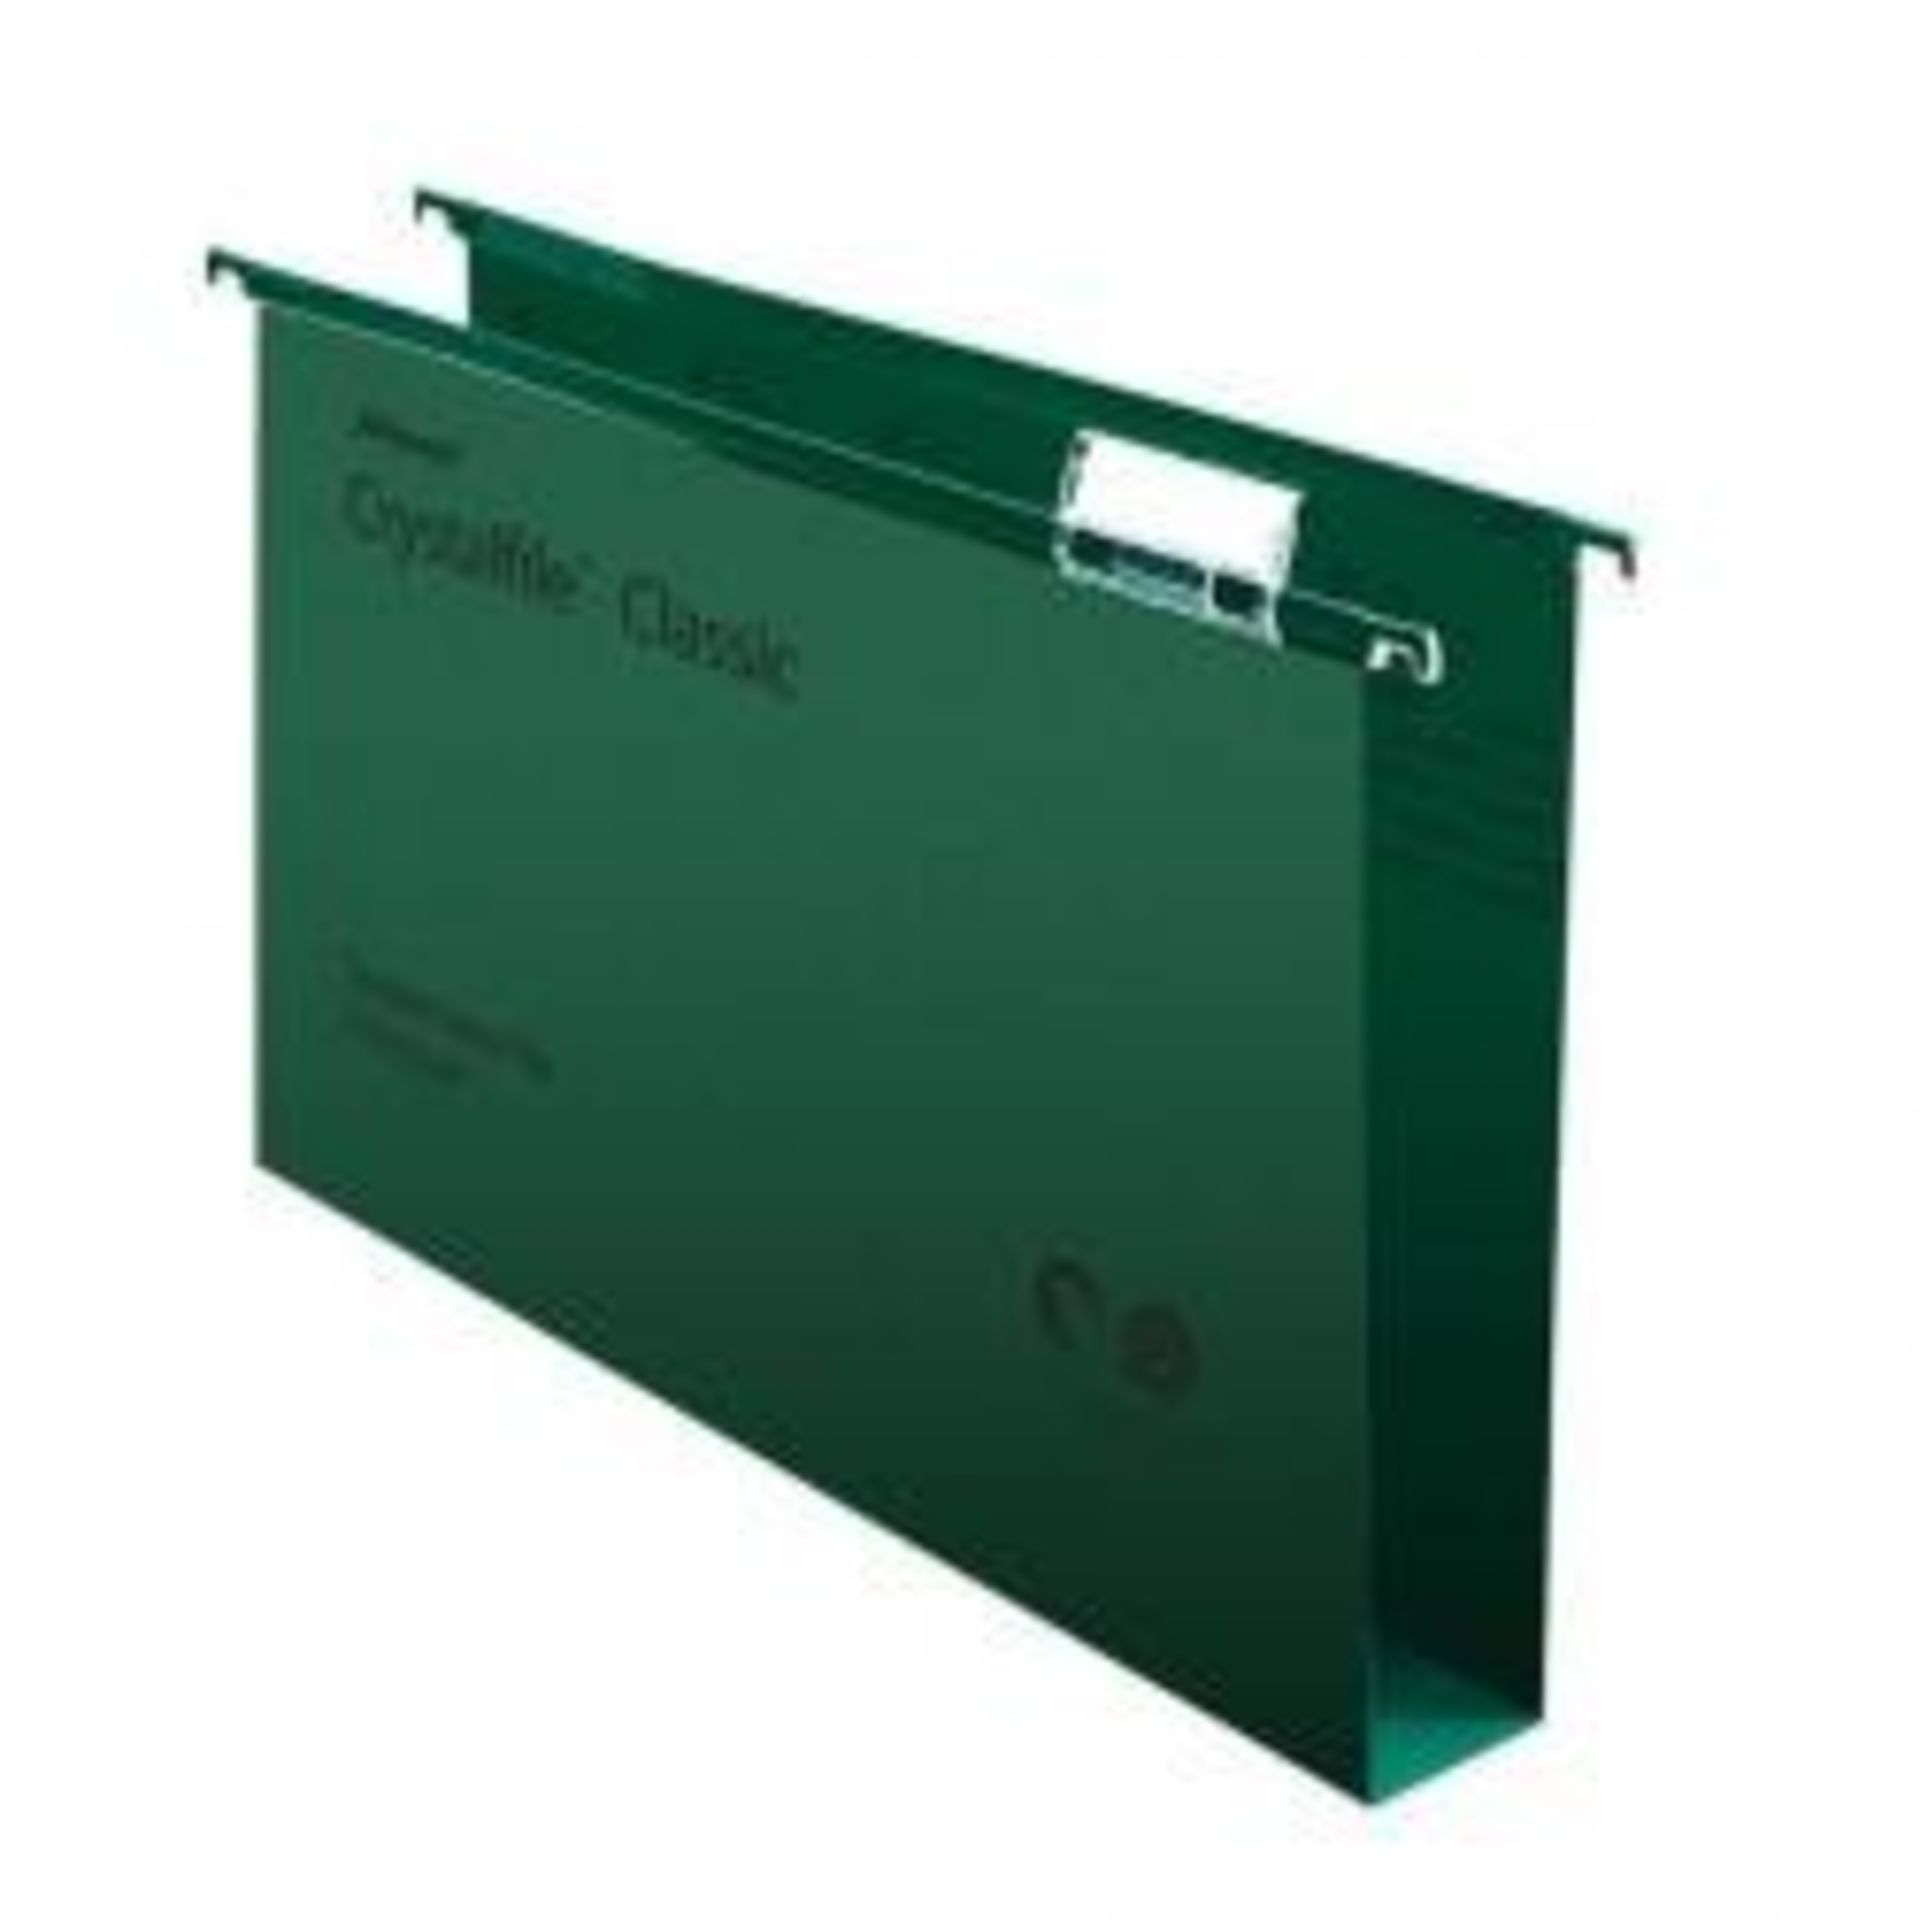 1 BOX OF 50 REXEL CRYSTALFILE CLASSIC IN GREEN / PN 172 / RRP £86.05 (VIEWING HIGHLY RECOMMENDED) - Image 3 of 3